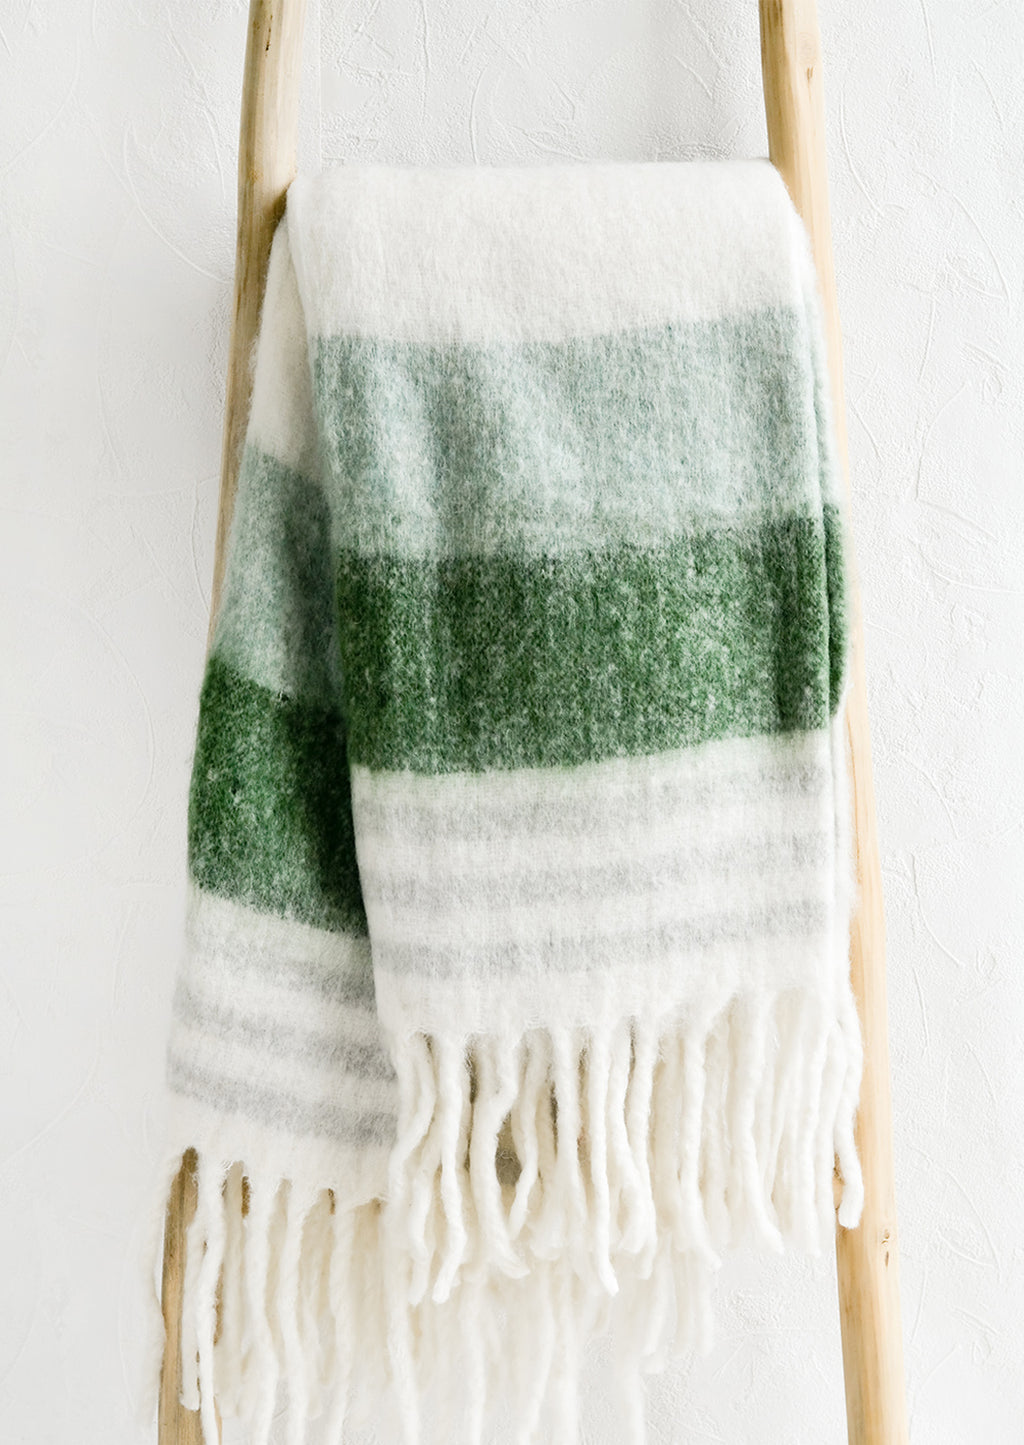 Green Multi: A striped throw blanket in green and grey with fringe trim on a wooden ladder.